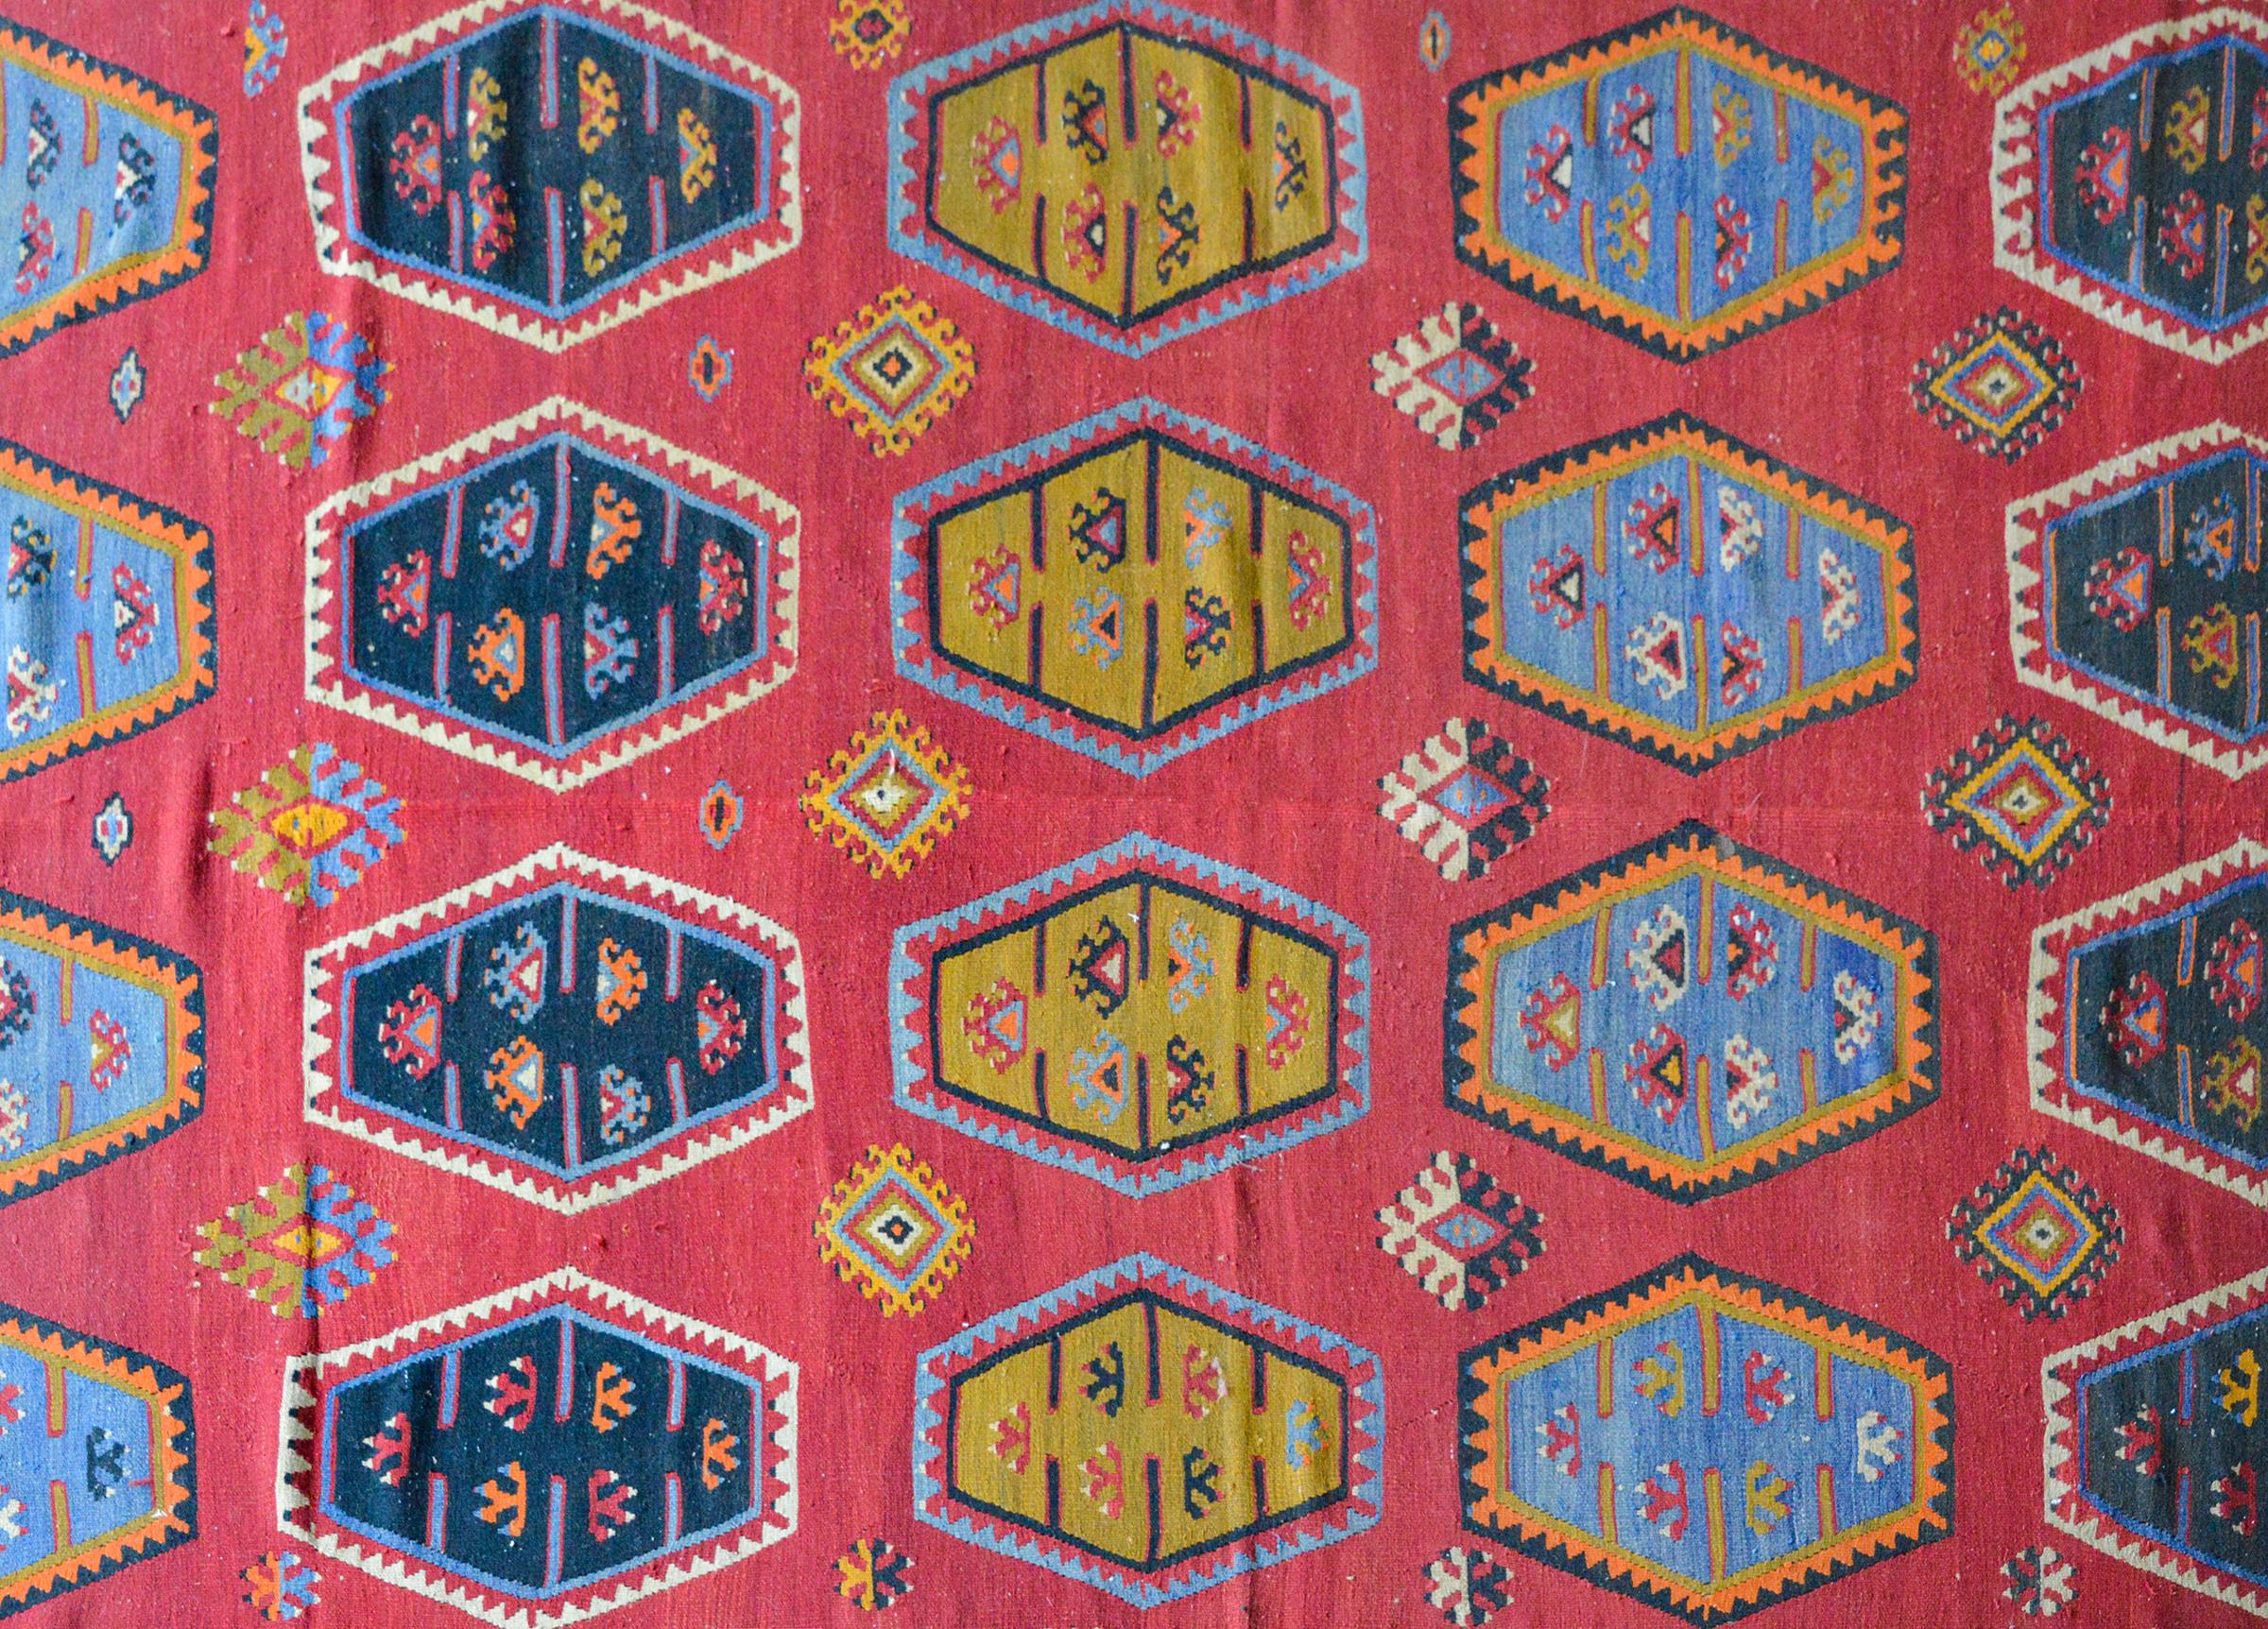 A wonderful mid-20th century Anatolian Turkish kilim rug with several hexagonal medallions each with stylized flowers and woven in light and dark indigo, green, orange, and white against a solid crimson background. The border is bold with two